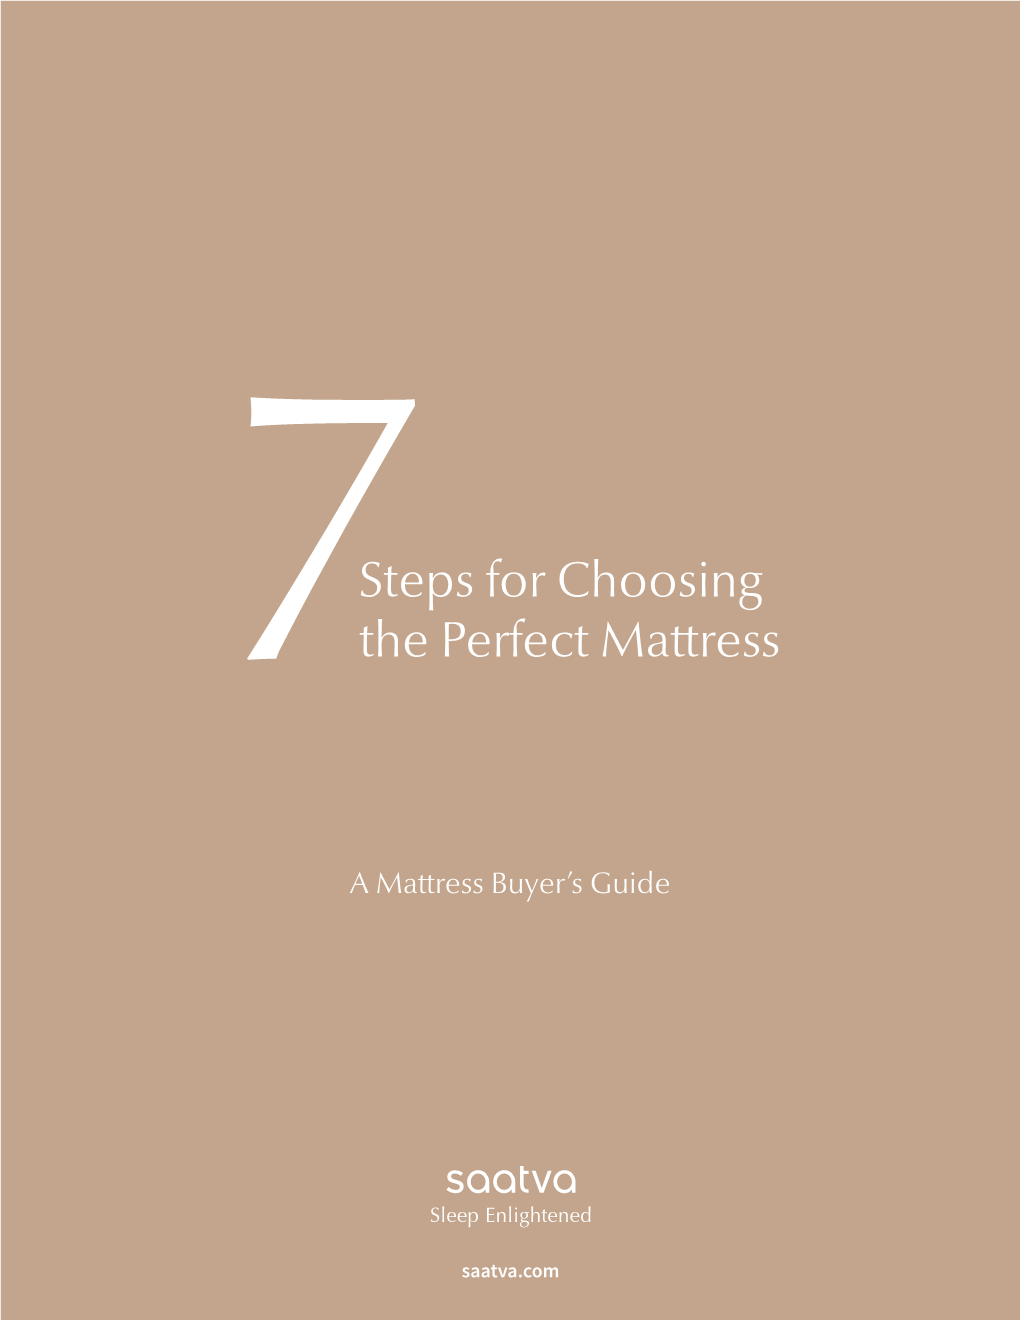 Steps for Choosing the Perfect Mattress